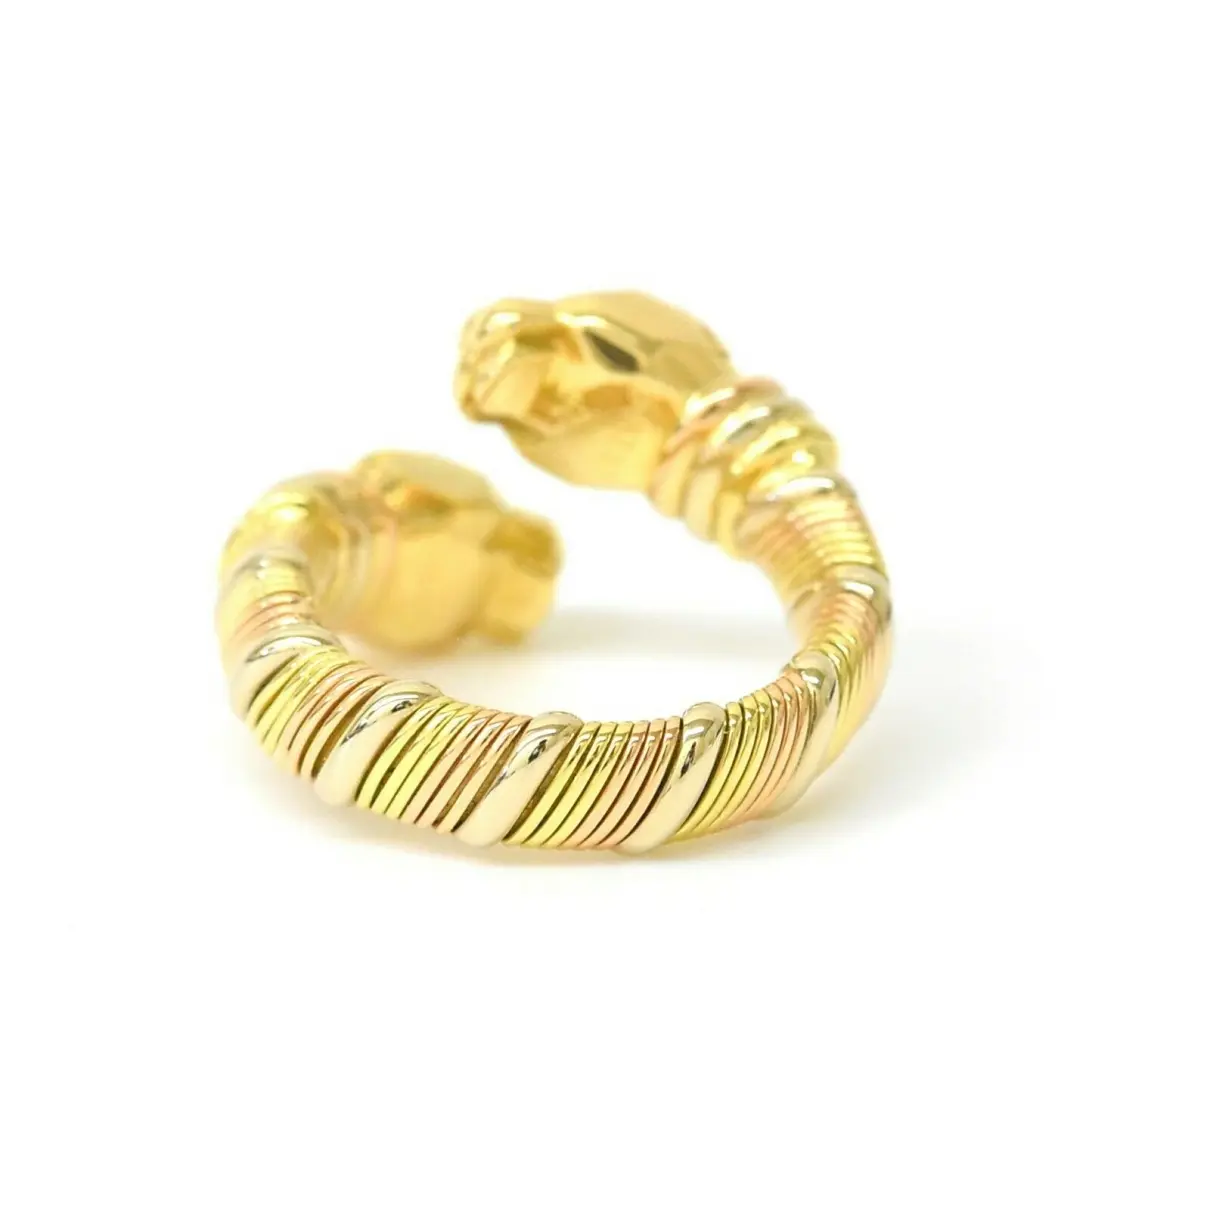 Buy Cartier Panthère yellow gold ring online - Vintage